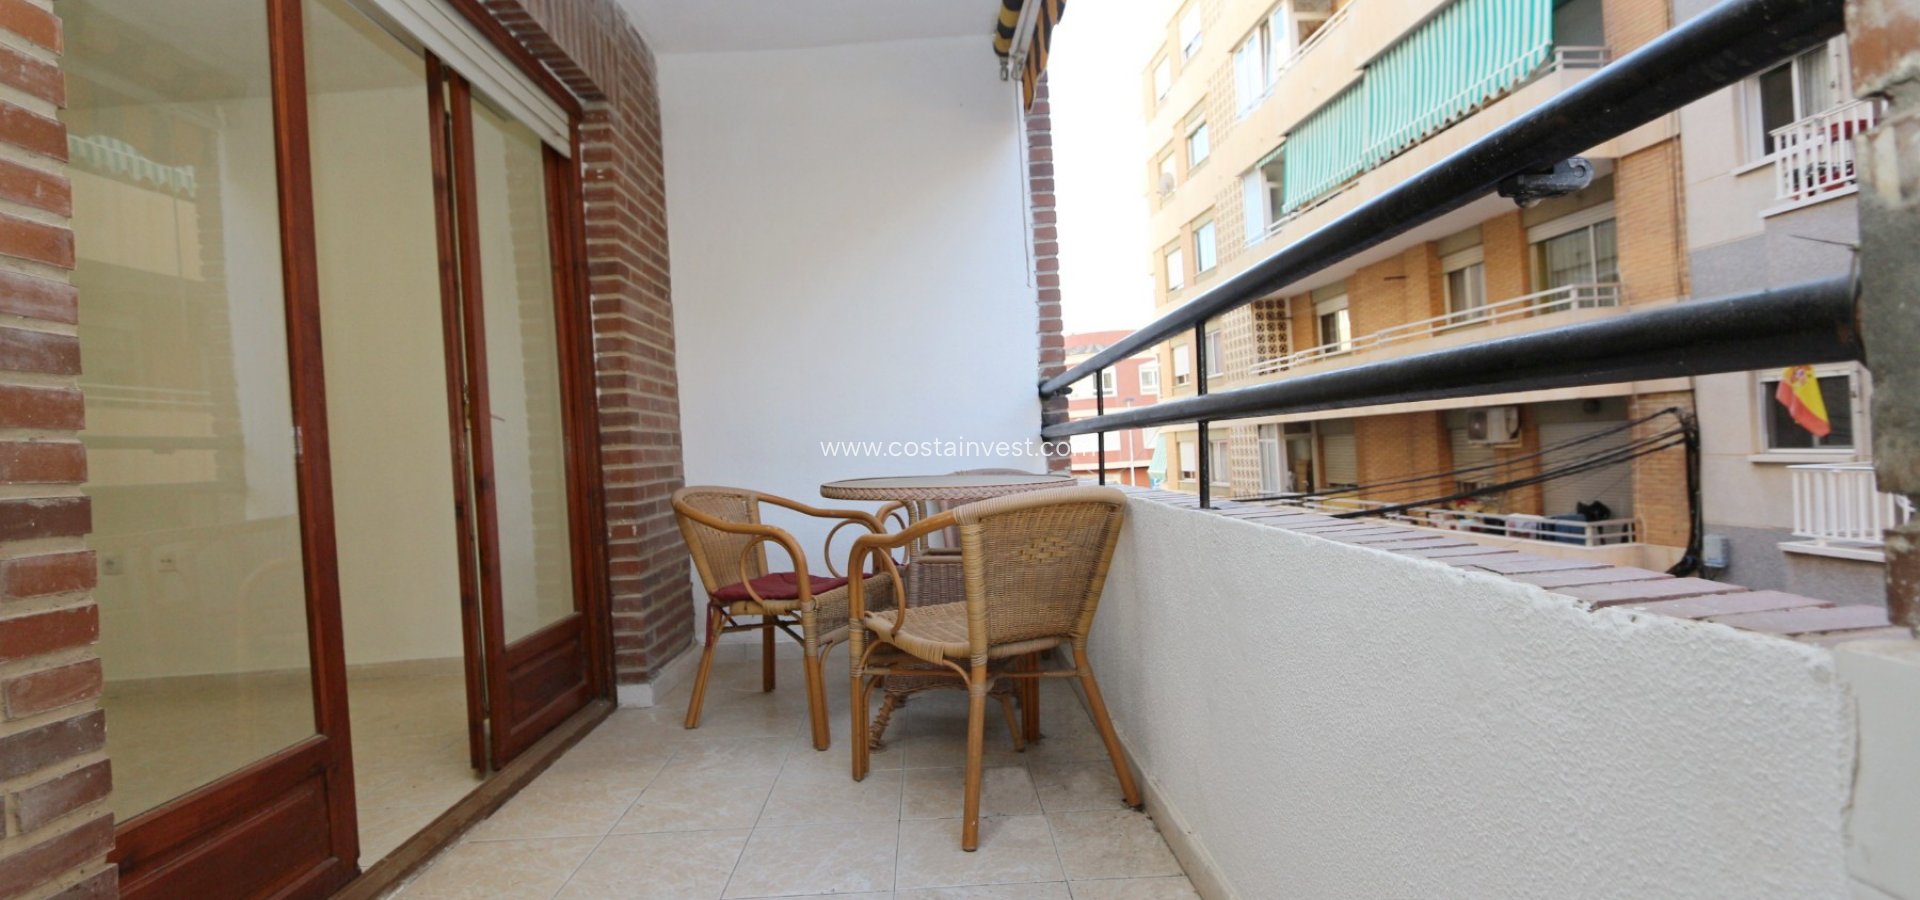 1 bedroom apartment by the beach in Torrevieja